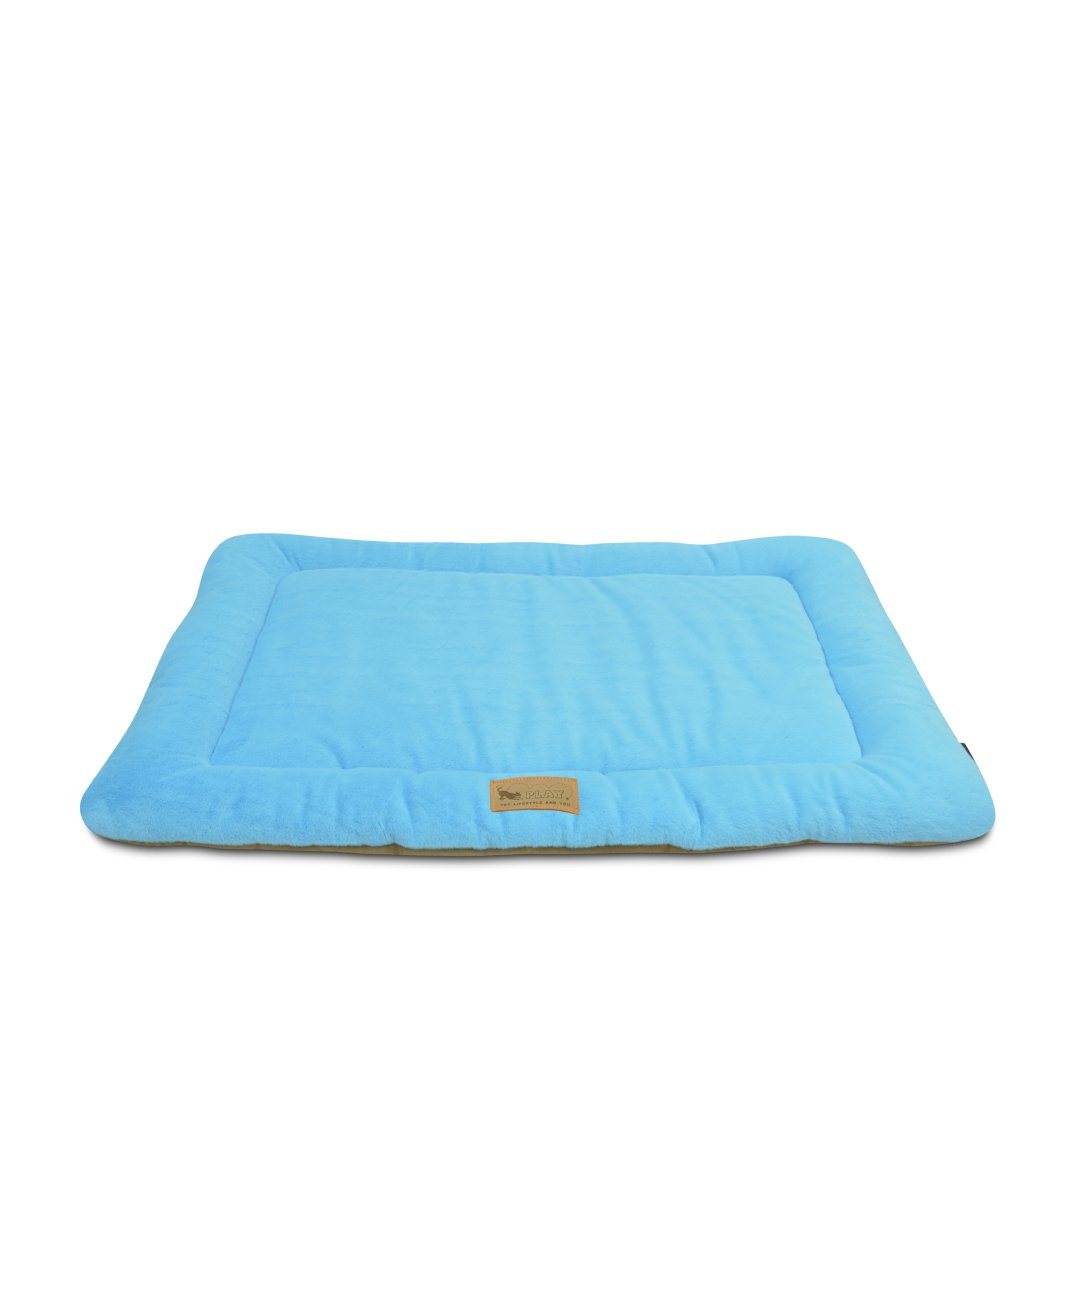 P.L.A.Y. Pet Pad Bed Dog Bed PLAY XS Turquoise 